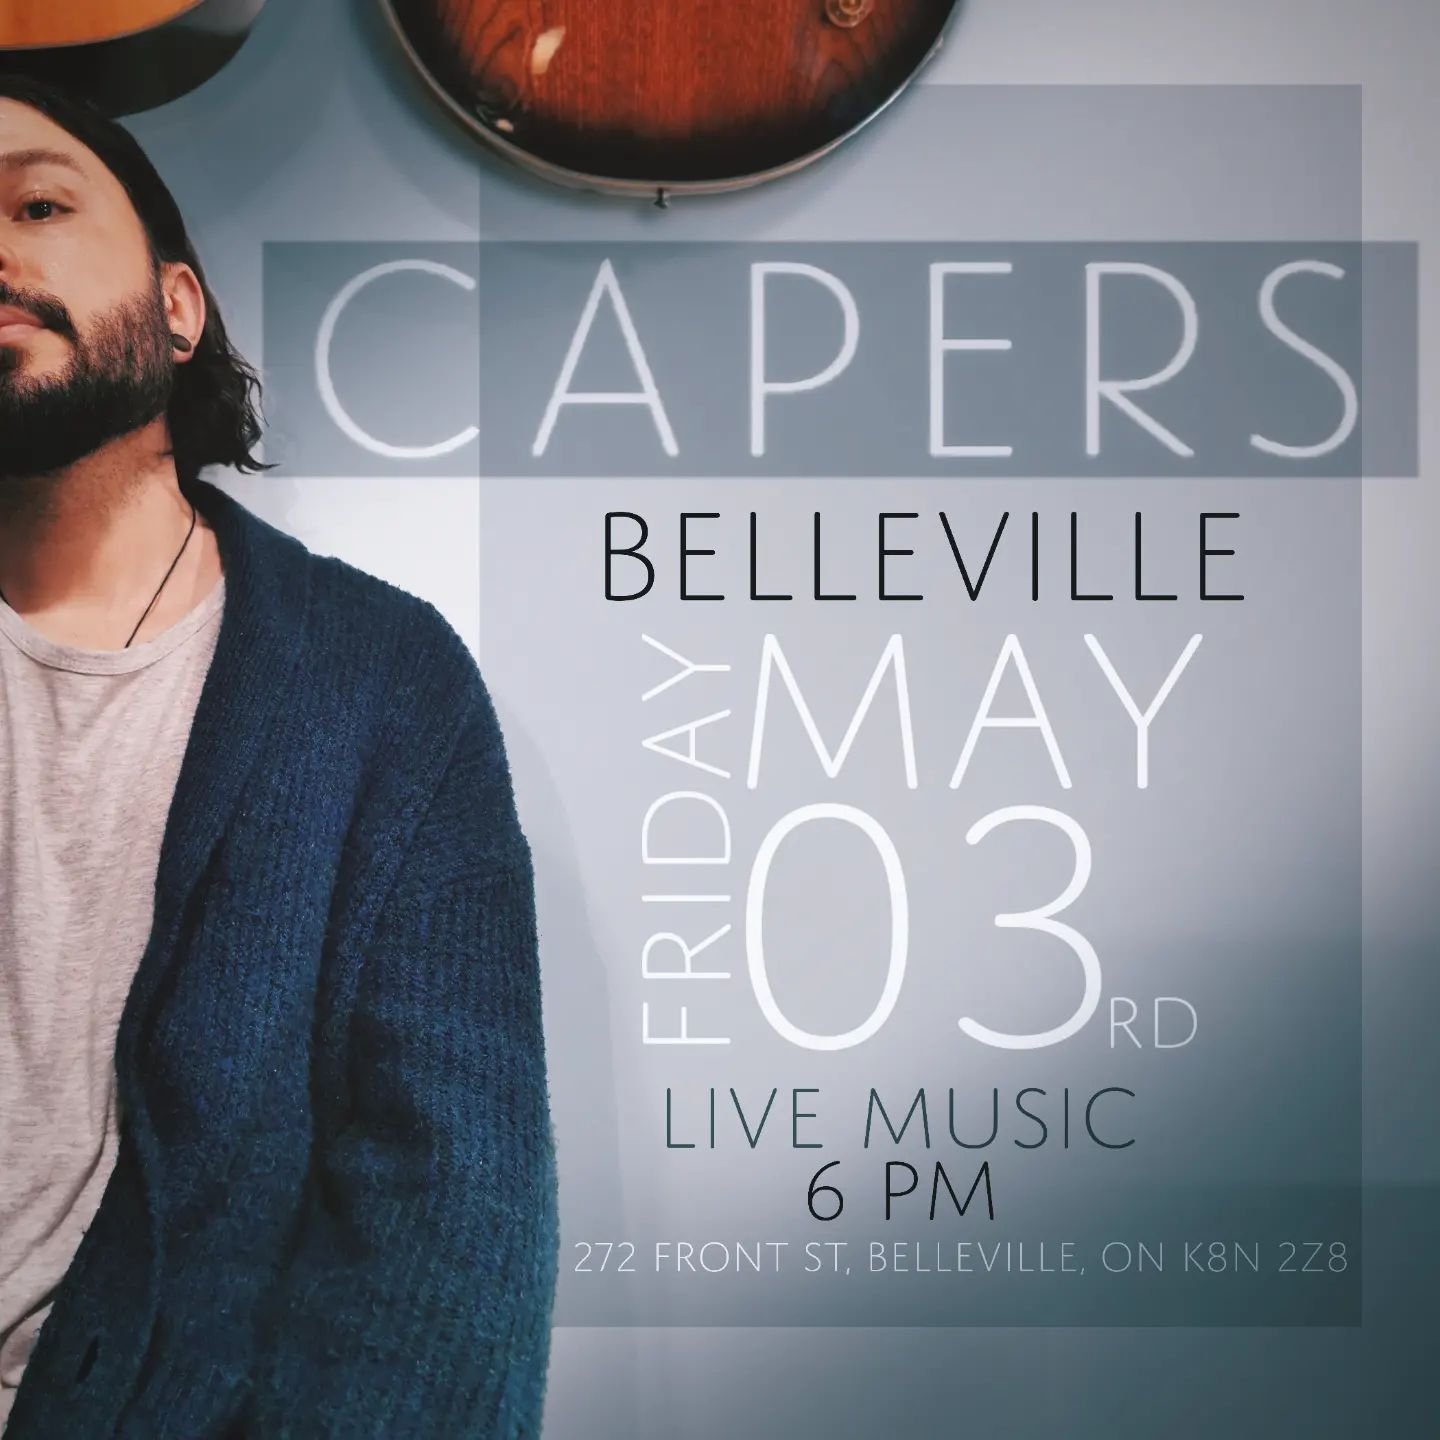 Catch me this Friday catching all the good vibes @caperskitchen. 
🎶 Music from 6-9pm! 🎶
.
.
.
.
#YanNickMichaud #bellevilleontario #livemusic #ygkmusician  #renfrewmusician #OntarioMusic #CanadianMusician&nbsp;#CanadianFolk #music #kingstonlive #YG